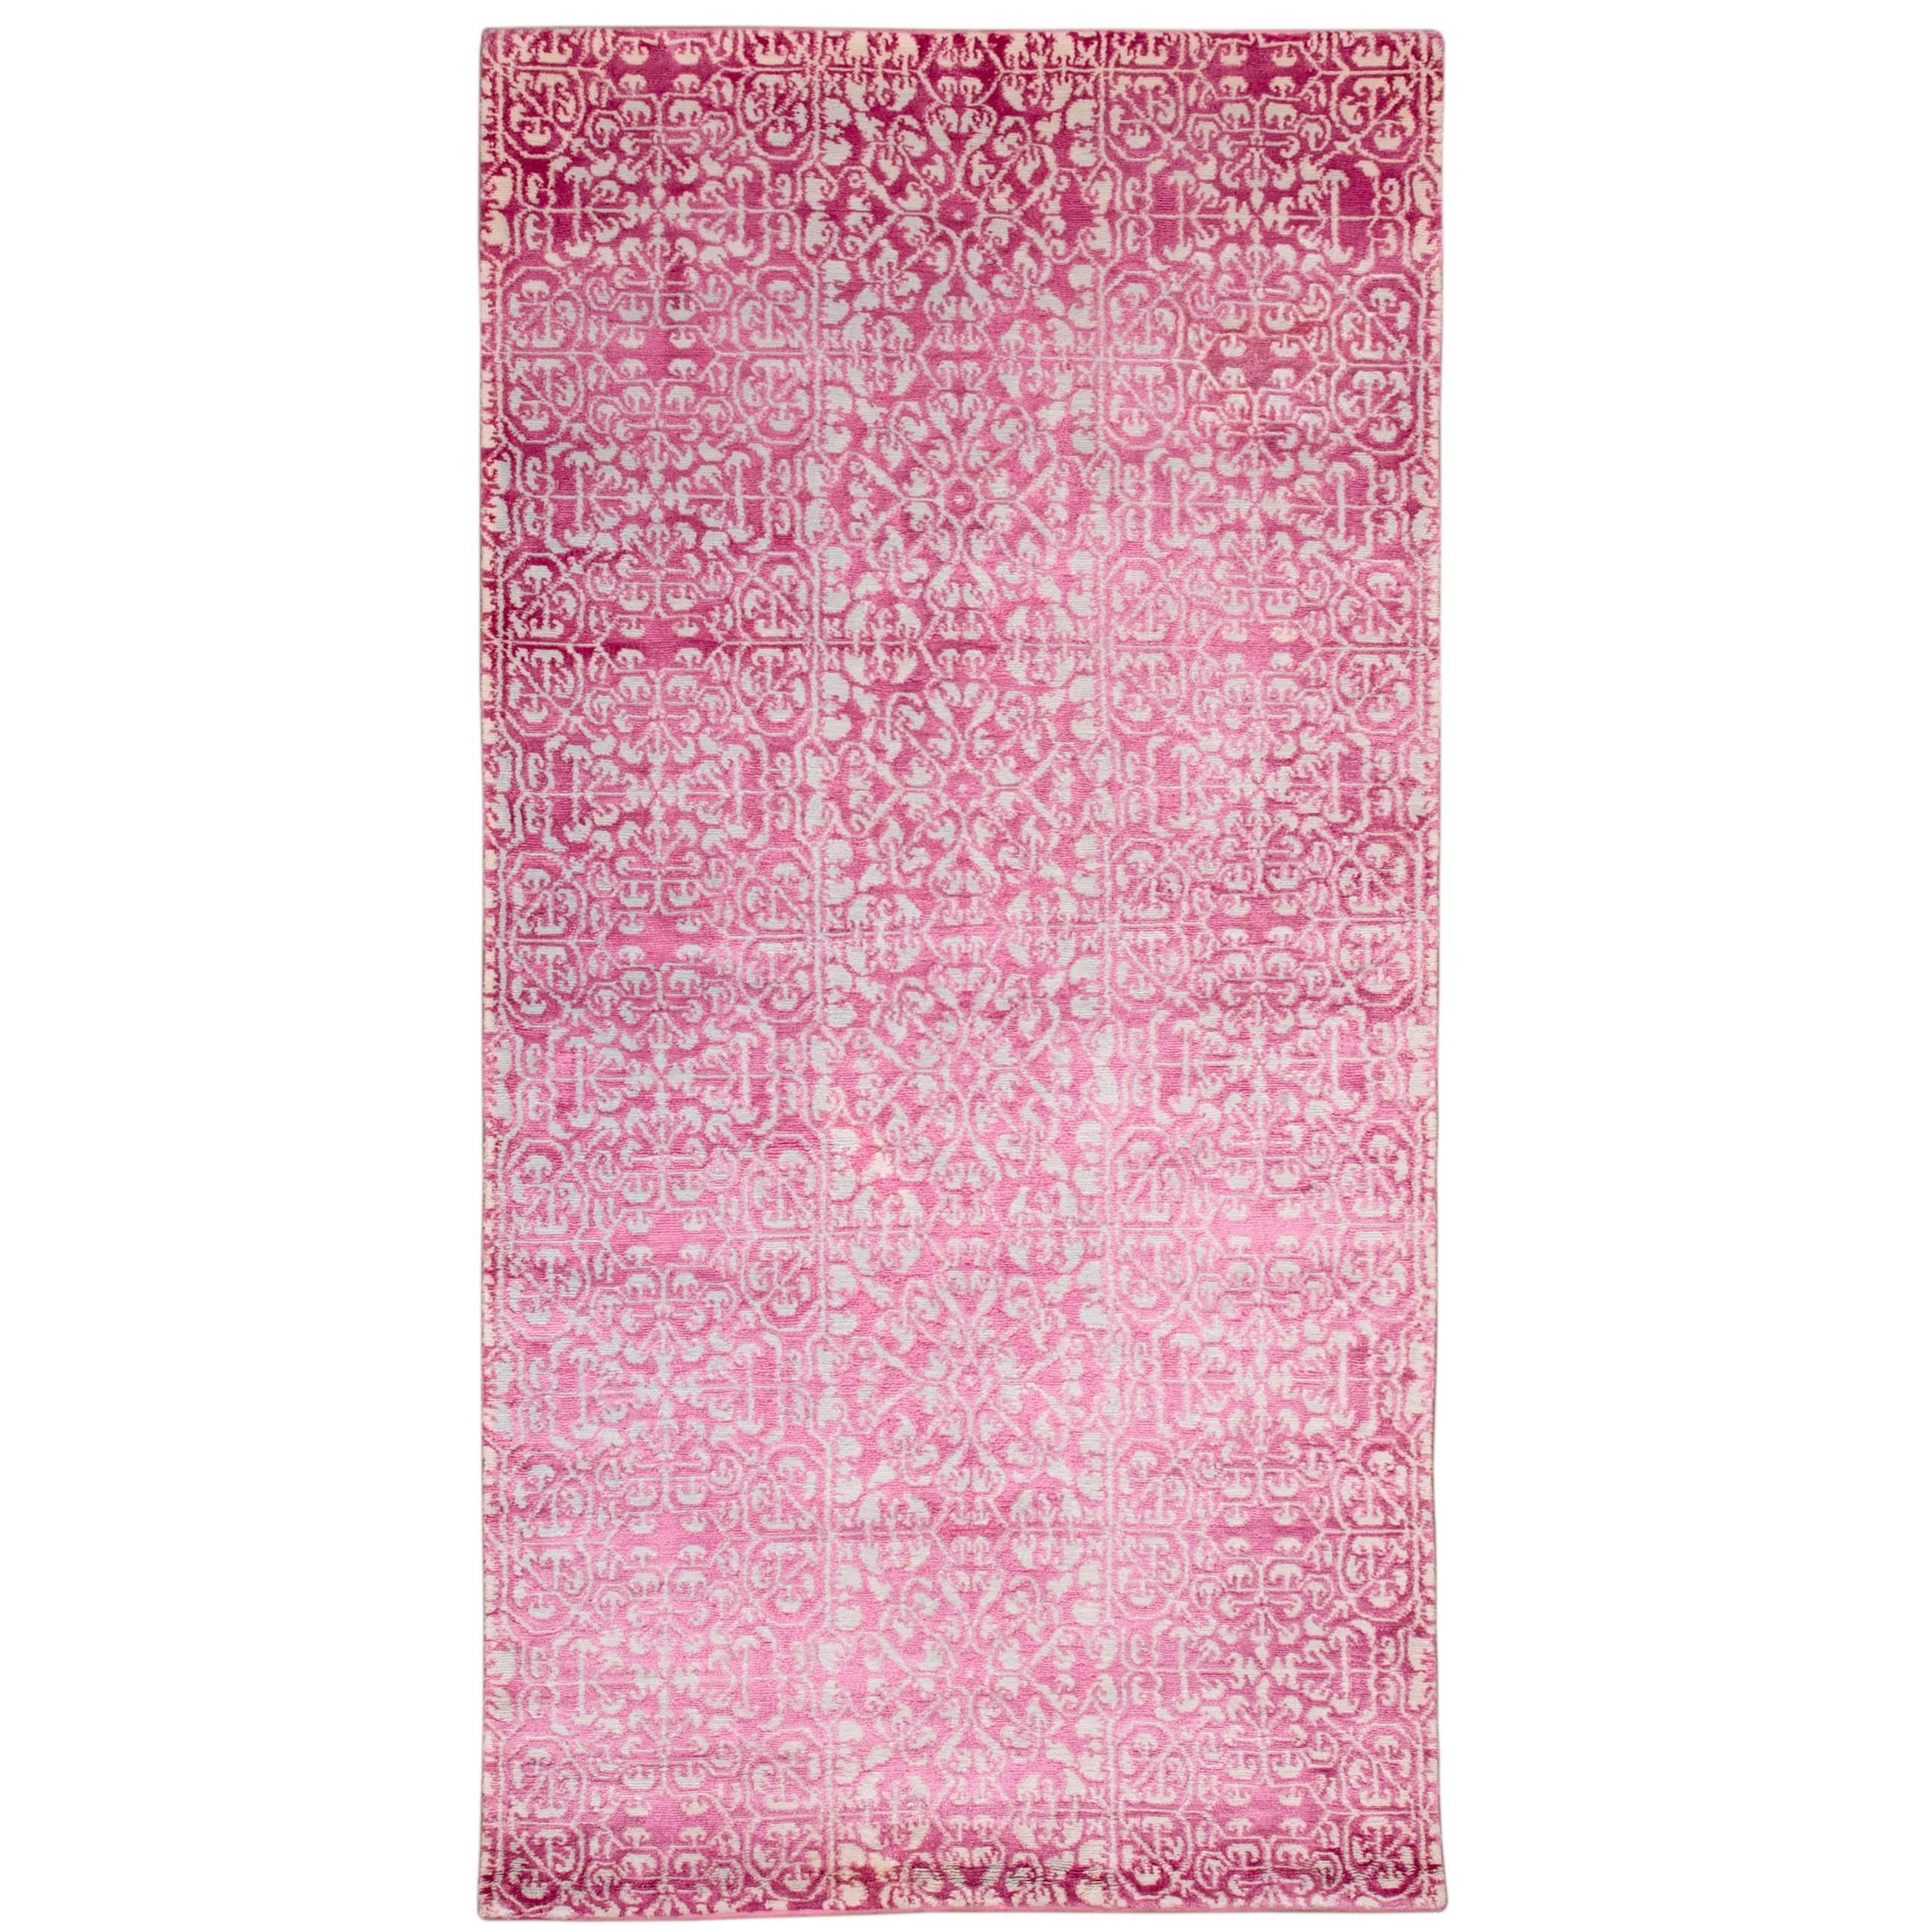 A Silk And Pashmina Area Rug In Pink And Powder Blue 3x6